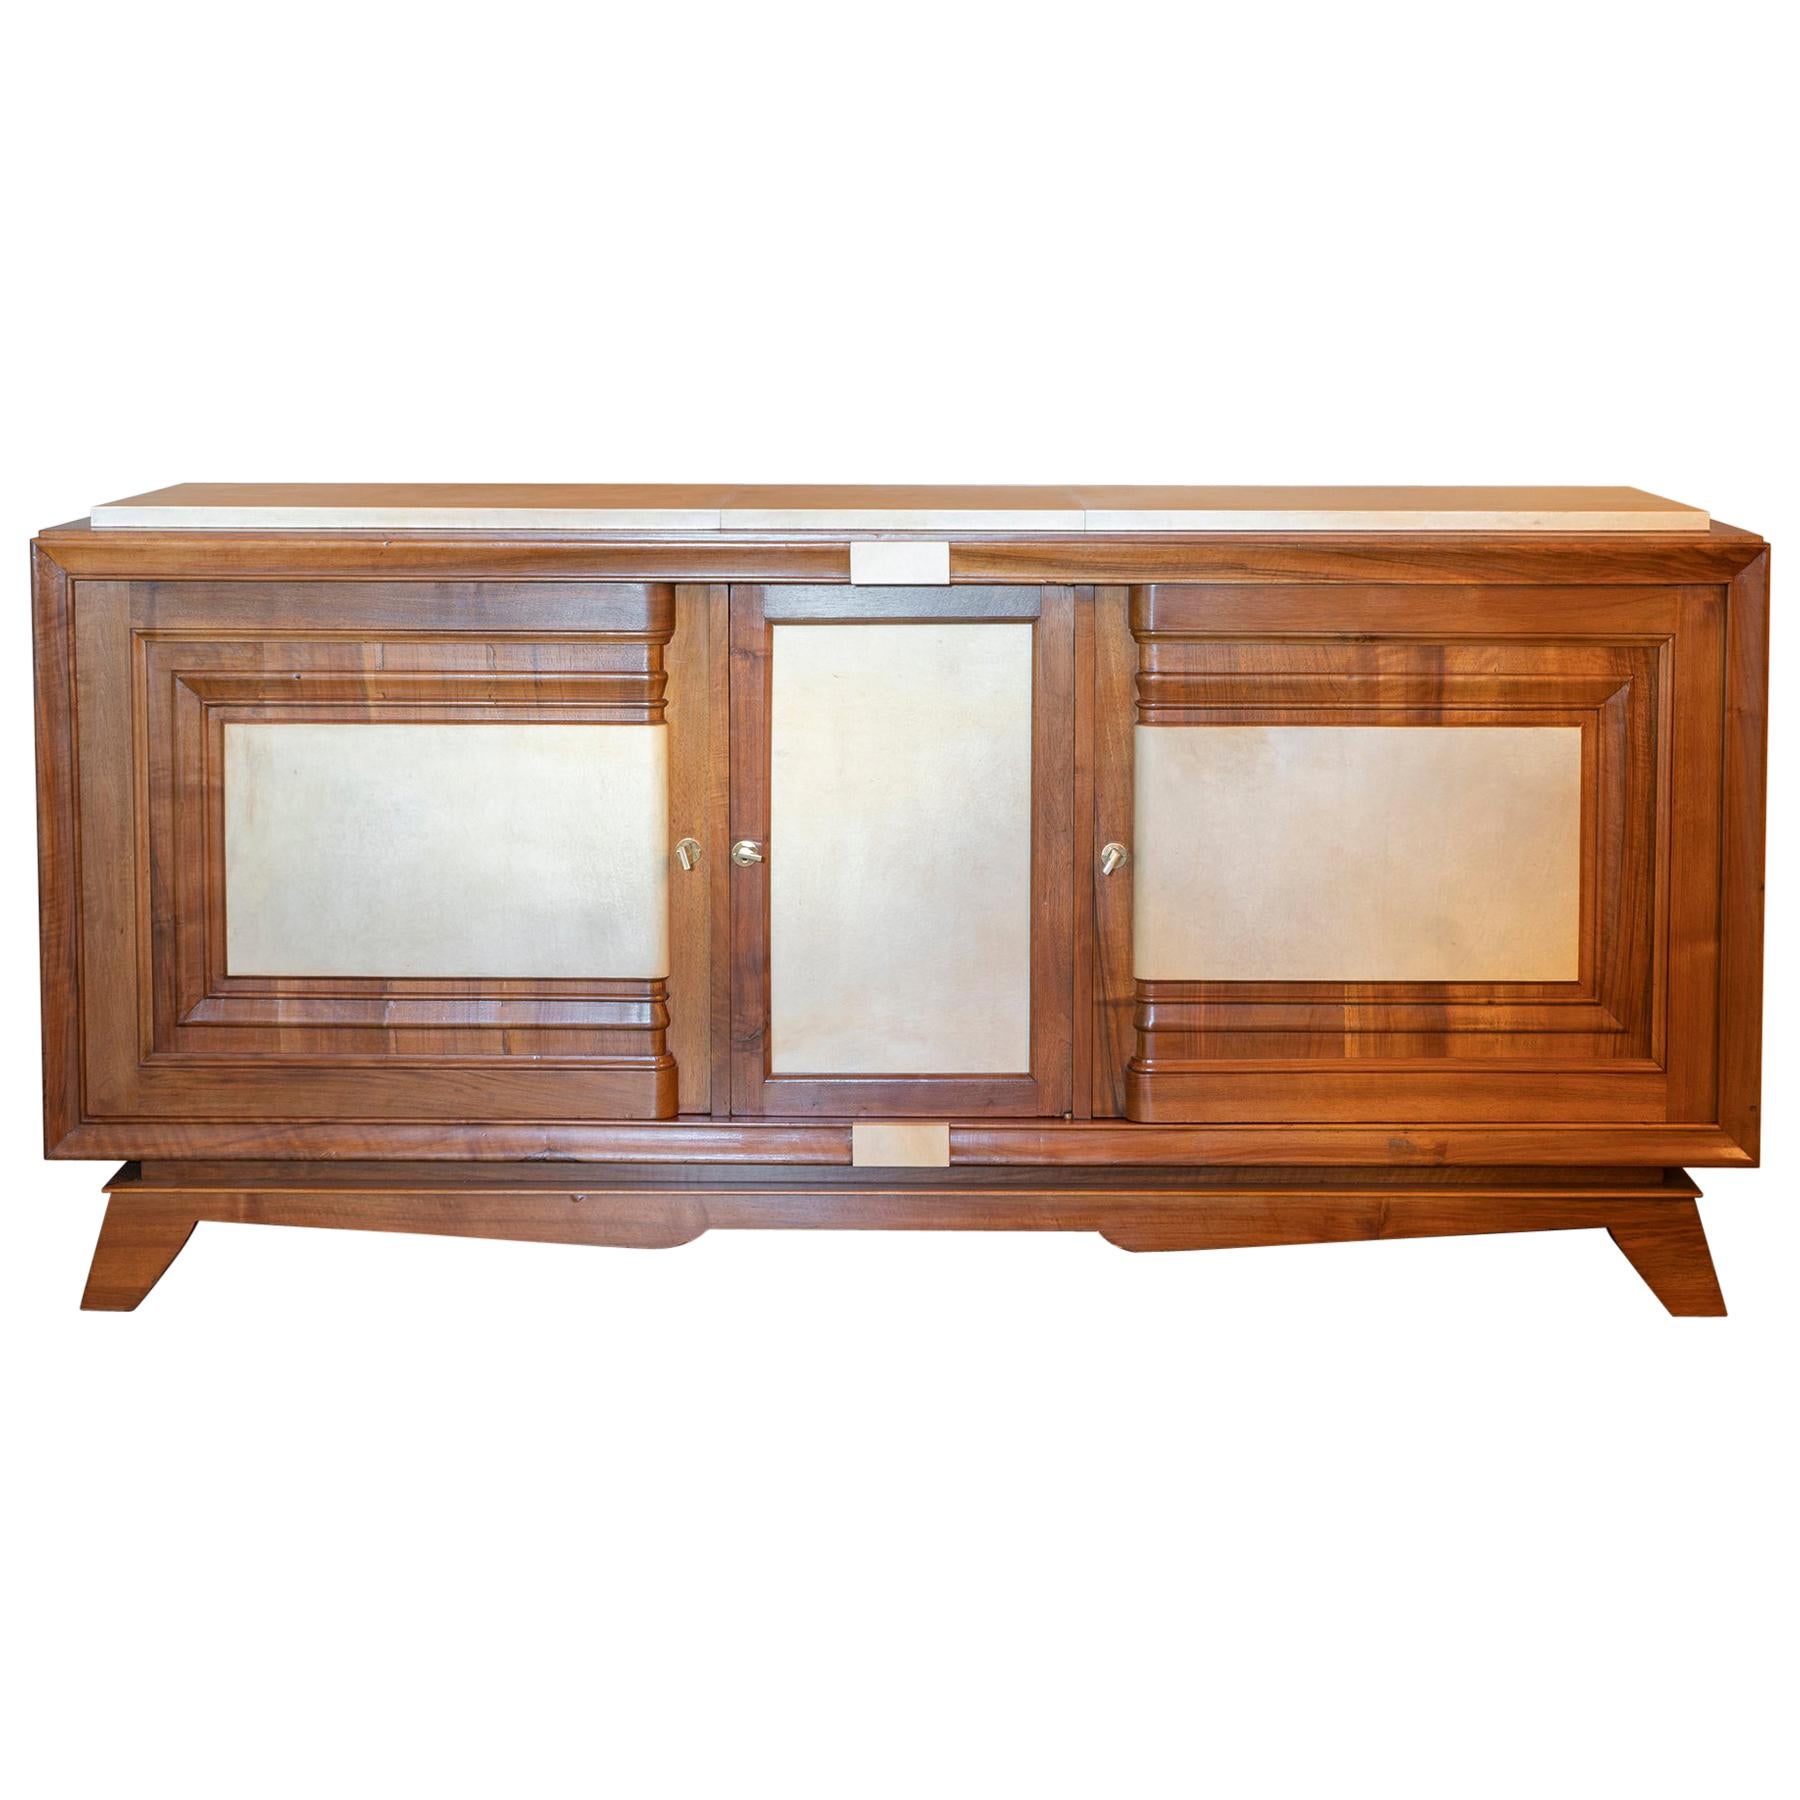 1940s French Walnut Sideboard with Natural Parchment, Brass Details